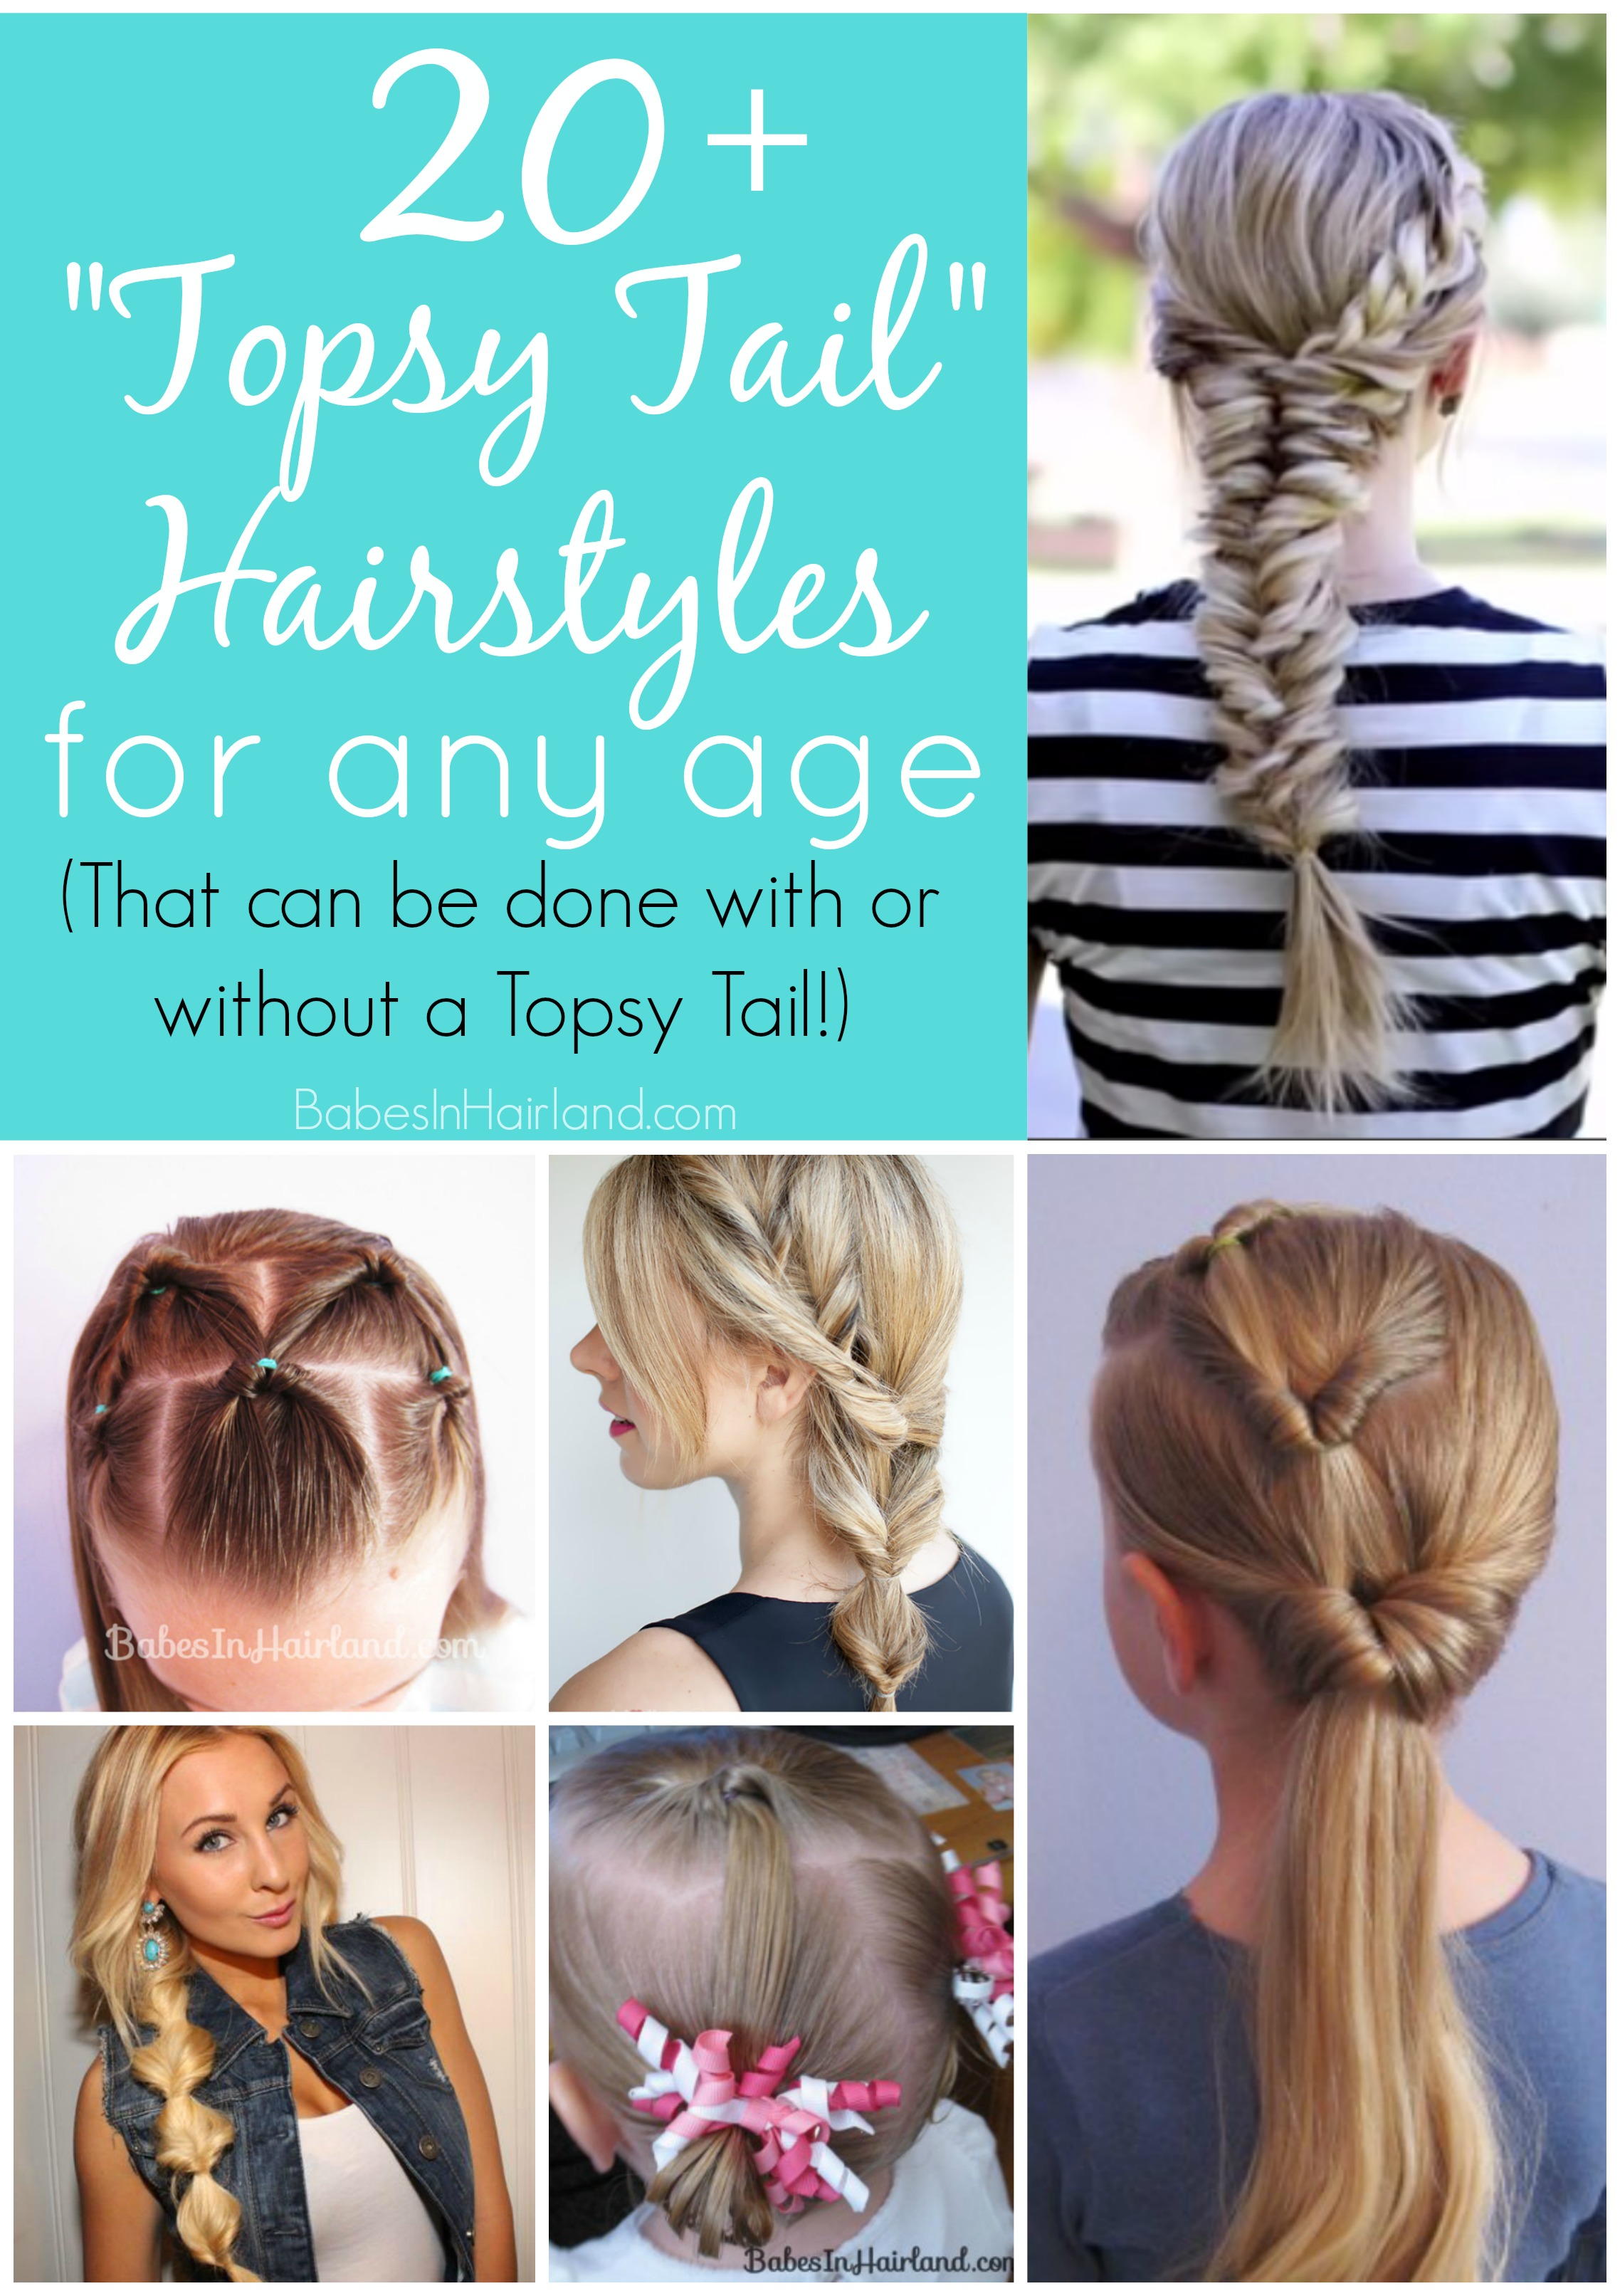 20+ topsy tail hairstyles for any age - babes in hairland